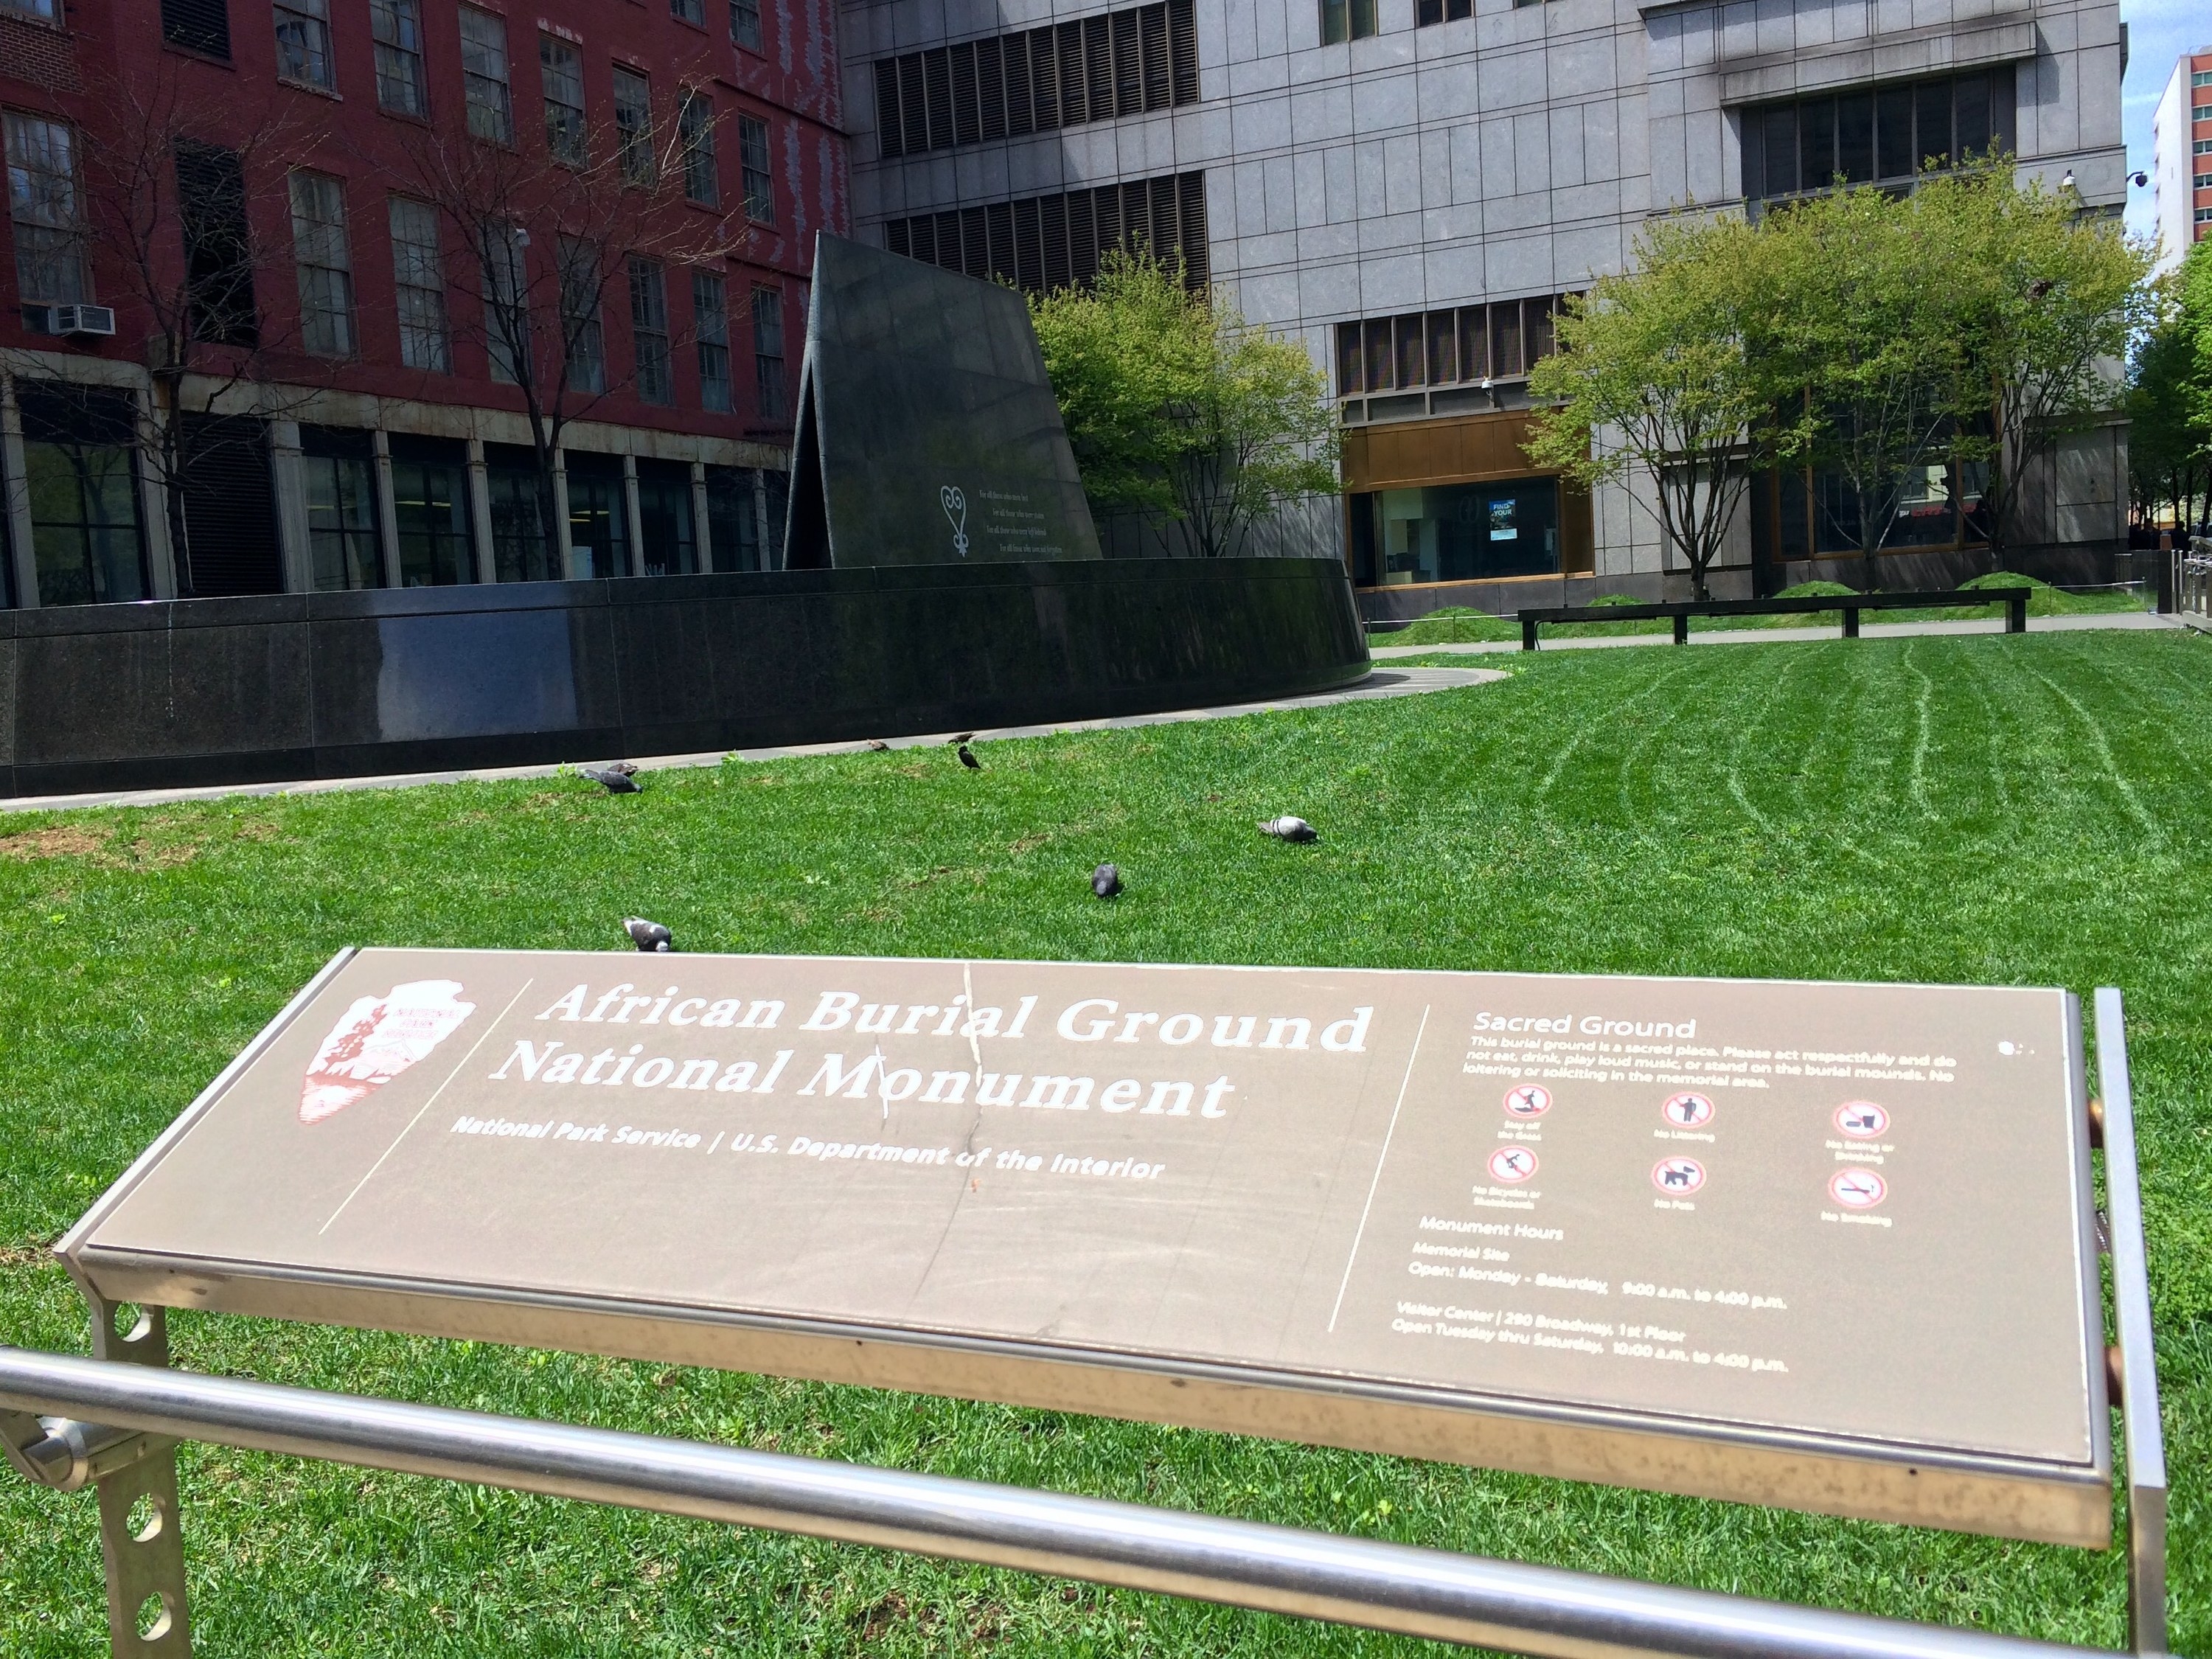 A sign identifying the African Burial Ground national monument hovers in front of an impeccably trimmed grassy area. A dark, marble monument looms over the grass.